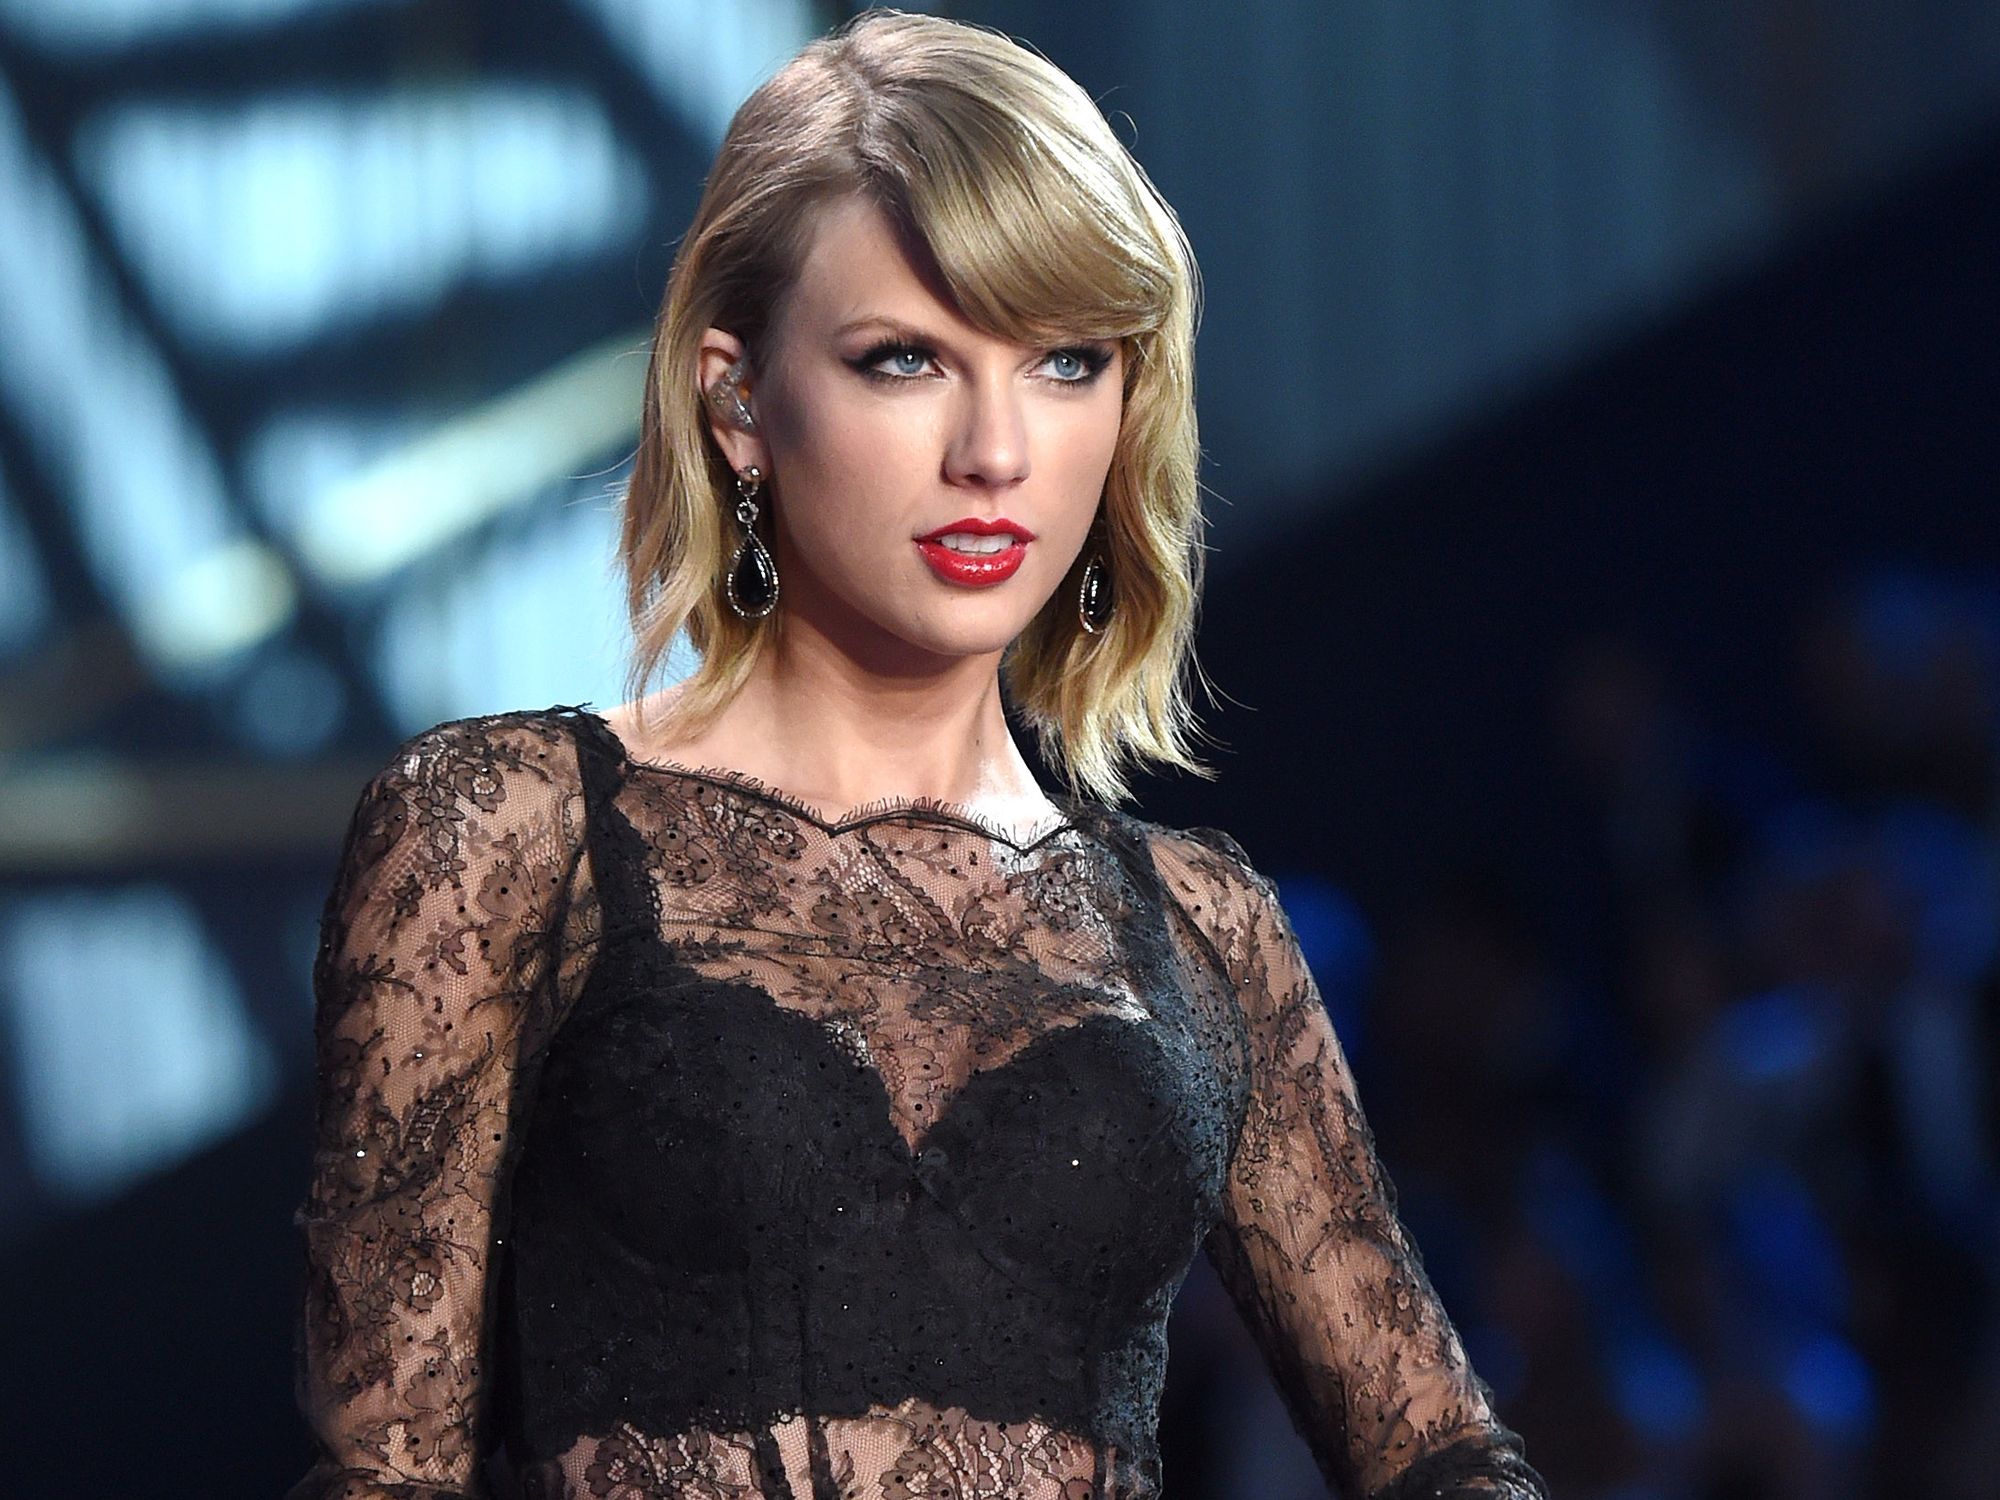 Taylor Swift Naked Lesbian - A Comprehensive Analysis Of Why The World Has Fallen For Taylor Swift